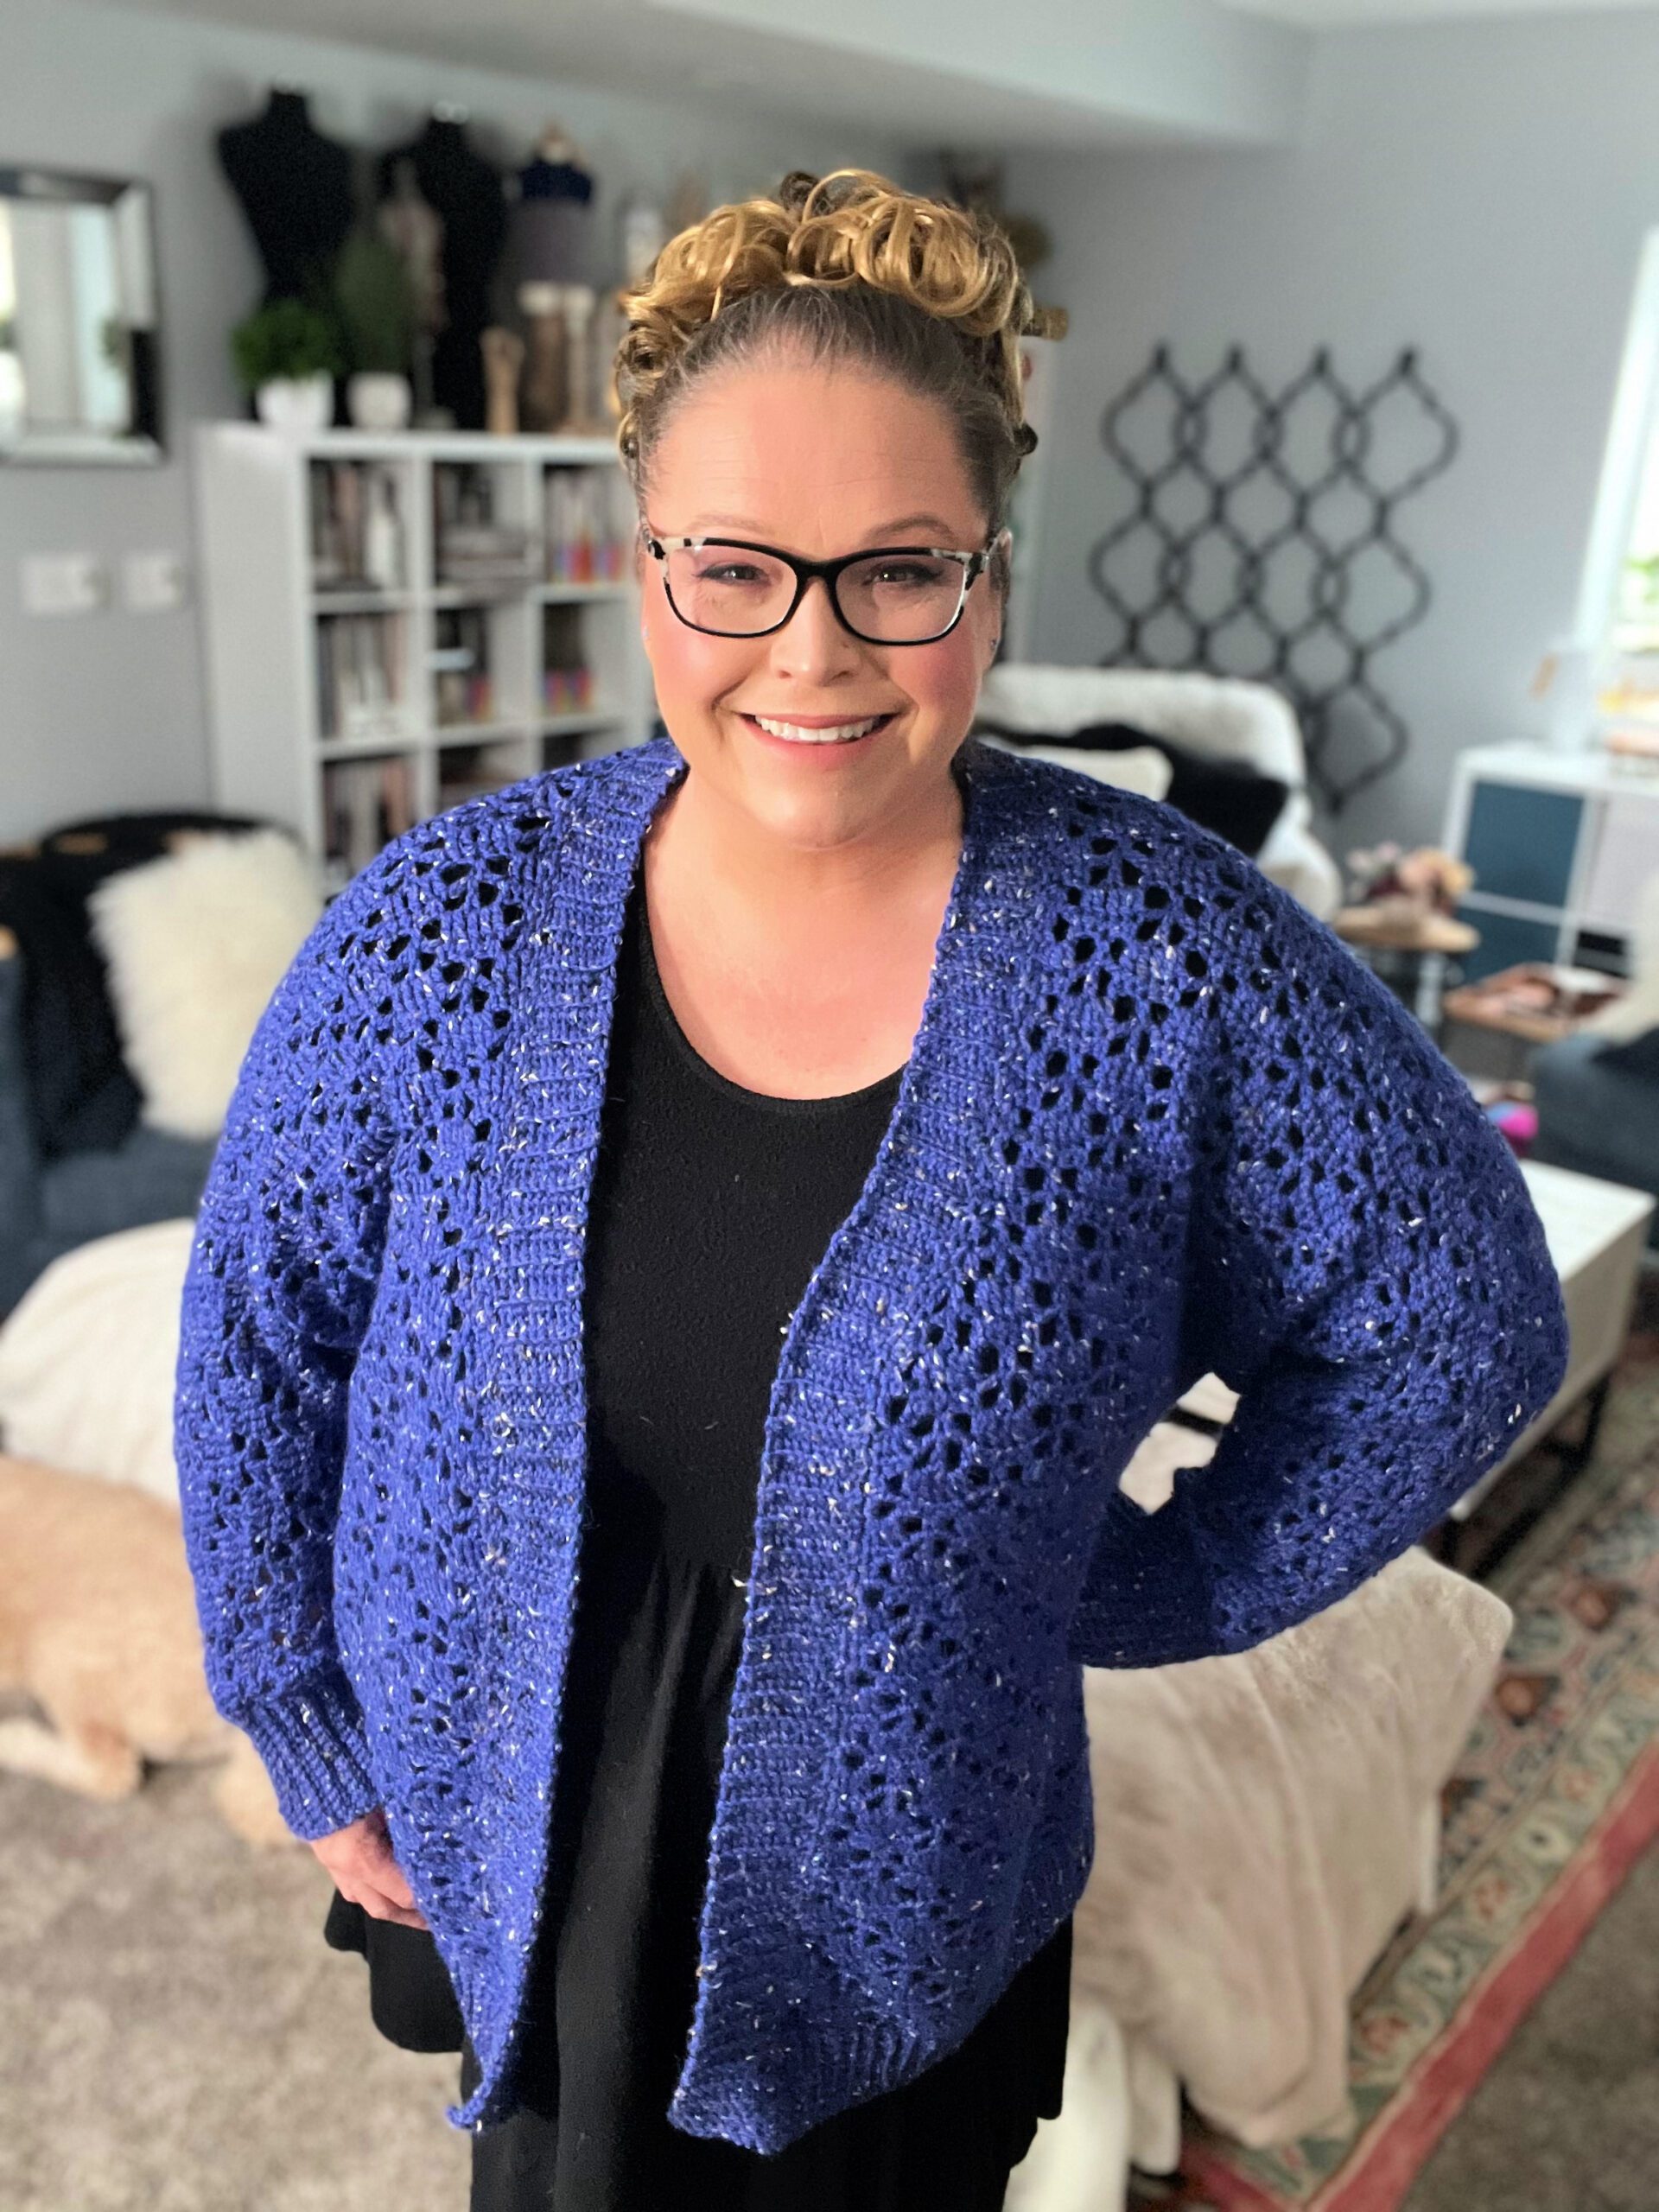 Marly Bird beams with joy, modeling her Aurora Lace Crochet Cardigan in cobalt blue, showcasing the bold lacework and cozy ribbed edges of this handmade garment.